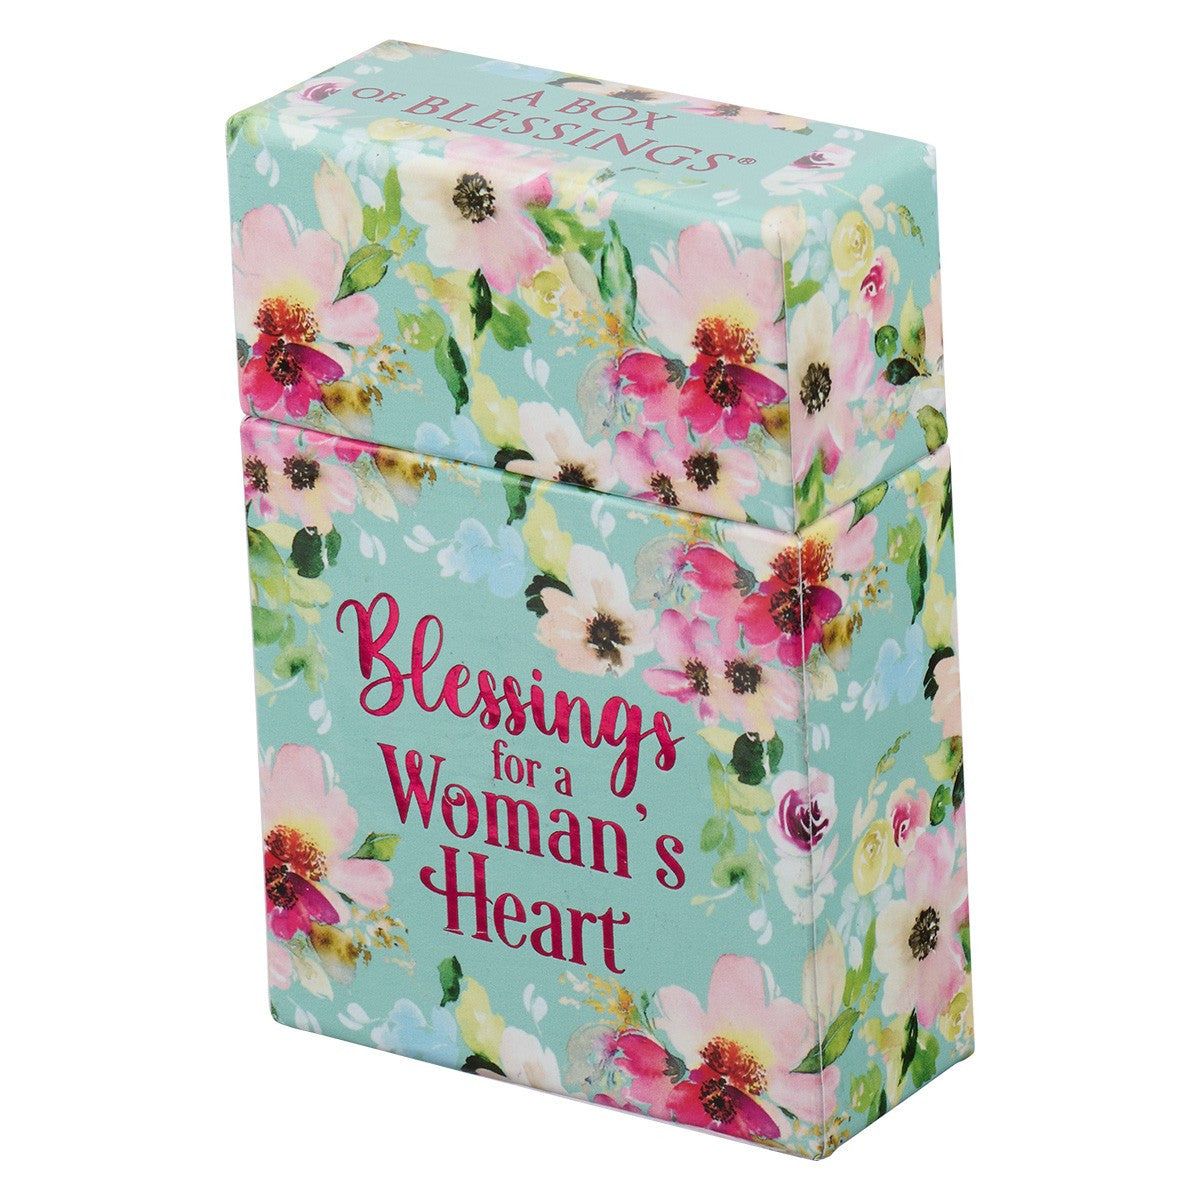 Blessings For A Woman's Heart Box of Blessings - The Christian Gift Company